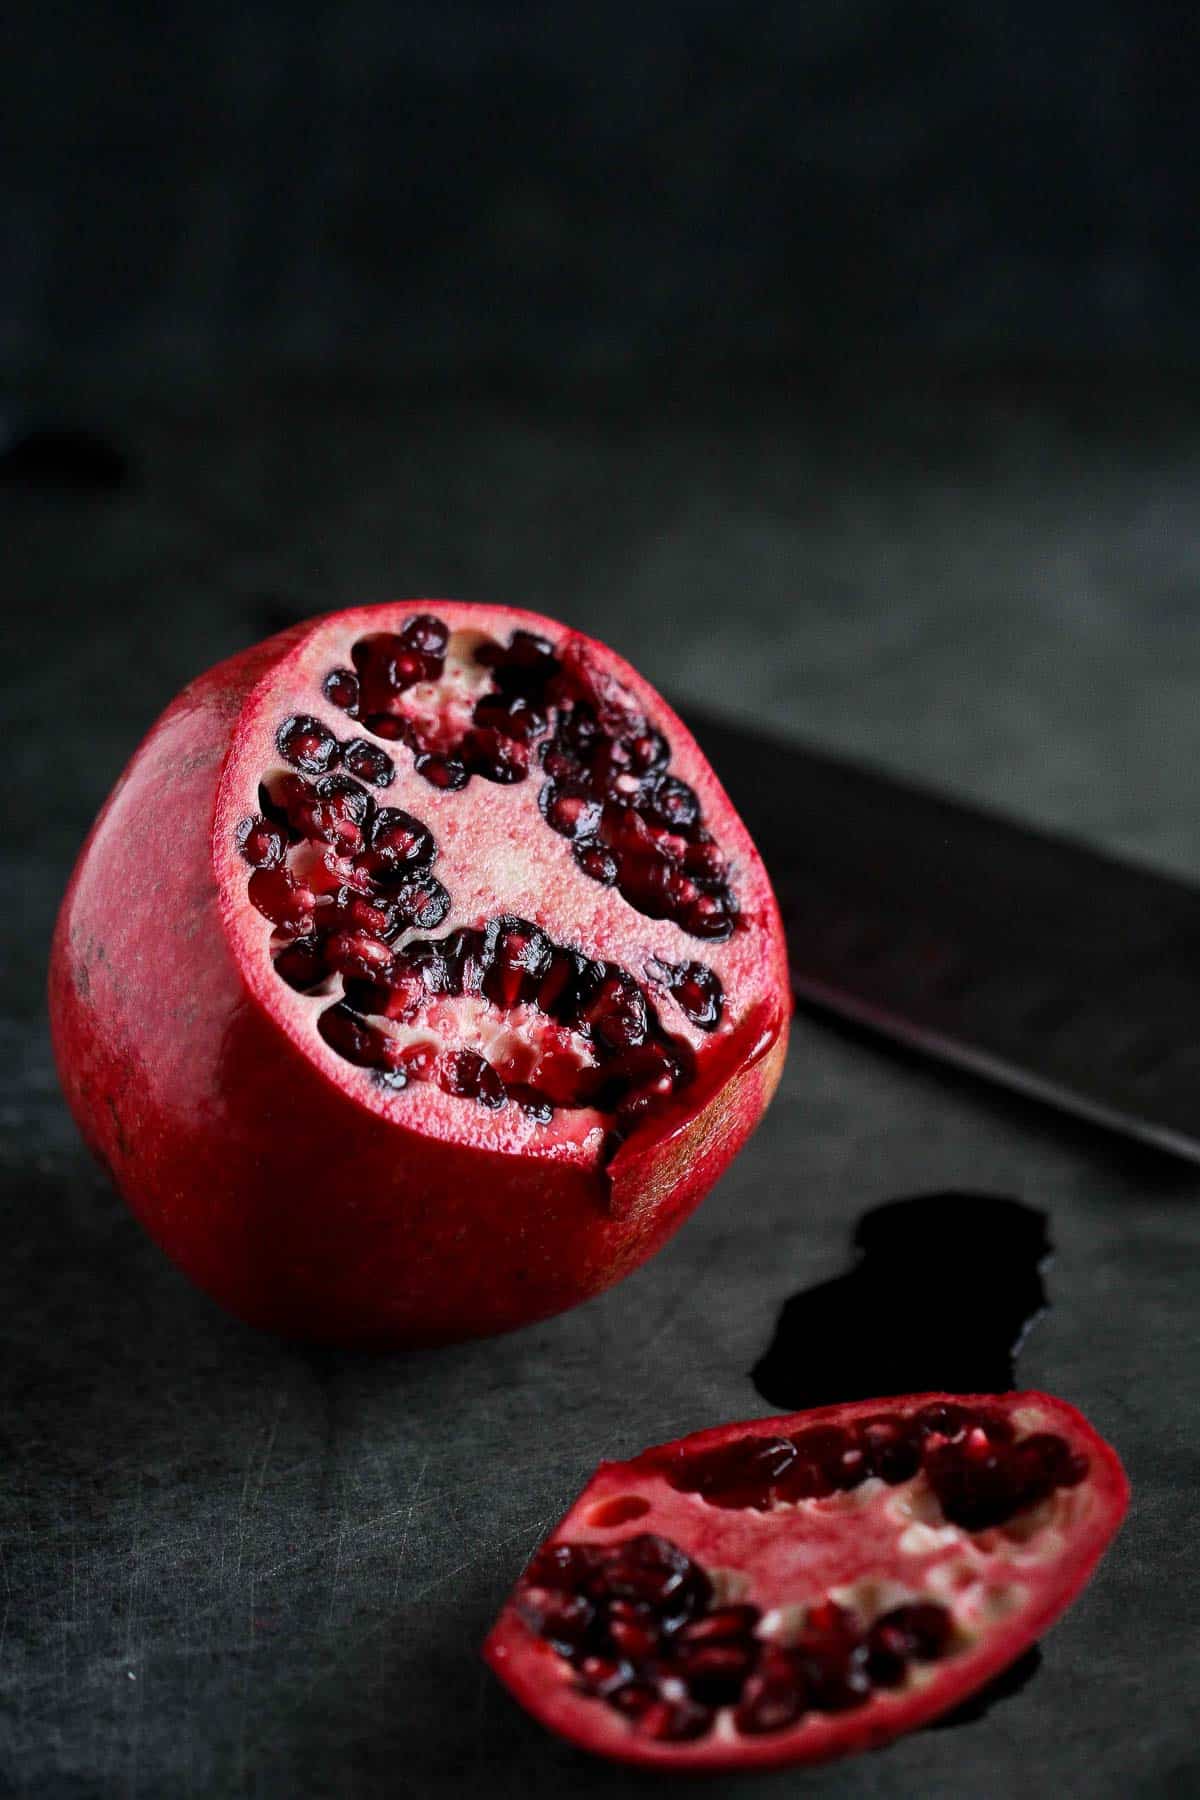 Ever wonder how to seed a pomegranate without making a huge mess? This step-by-step photo tutorial will show you just how easy it is. | Cut pomegranate